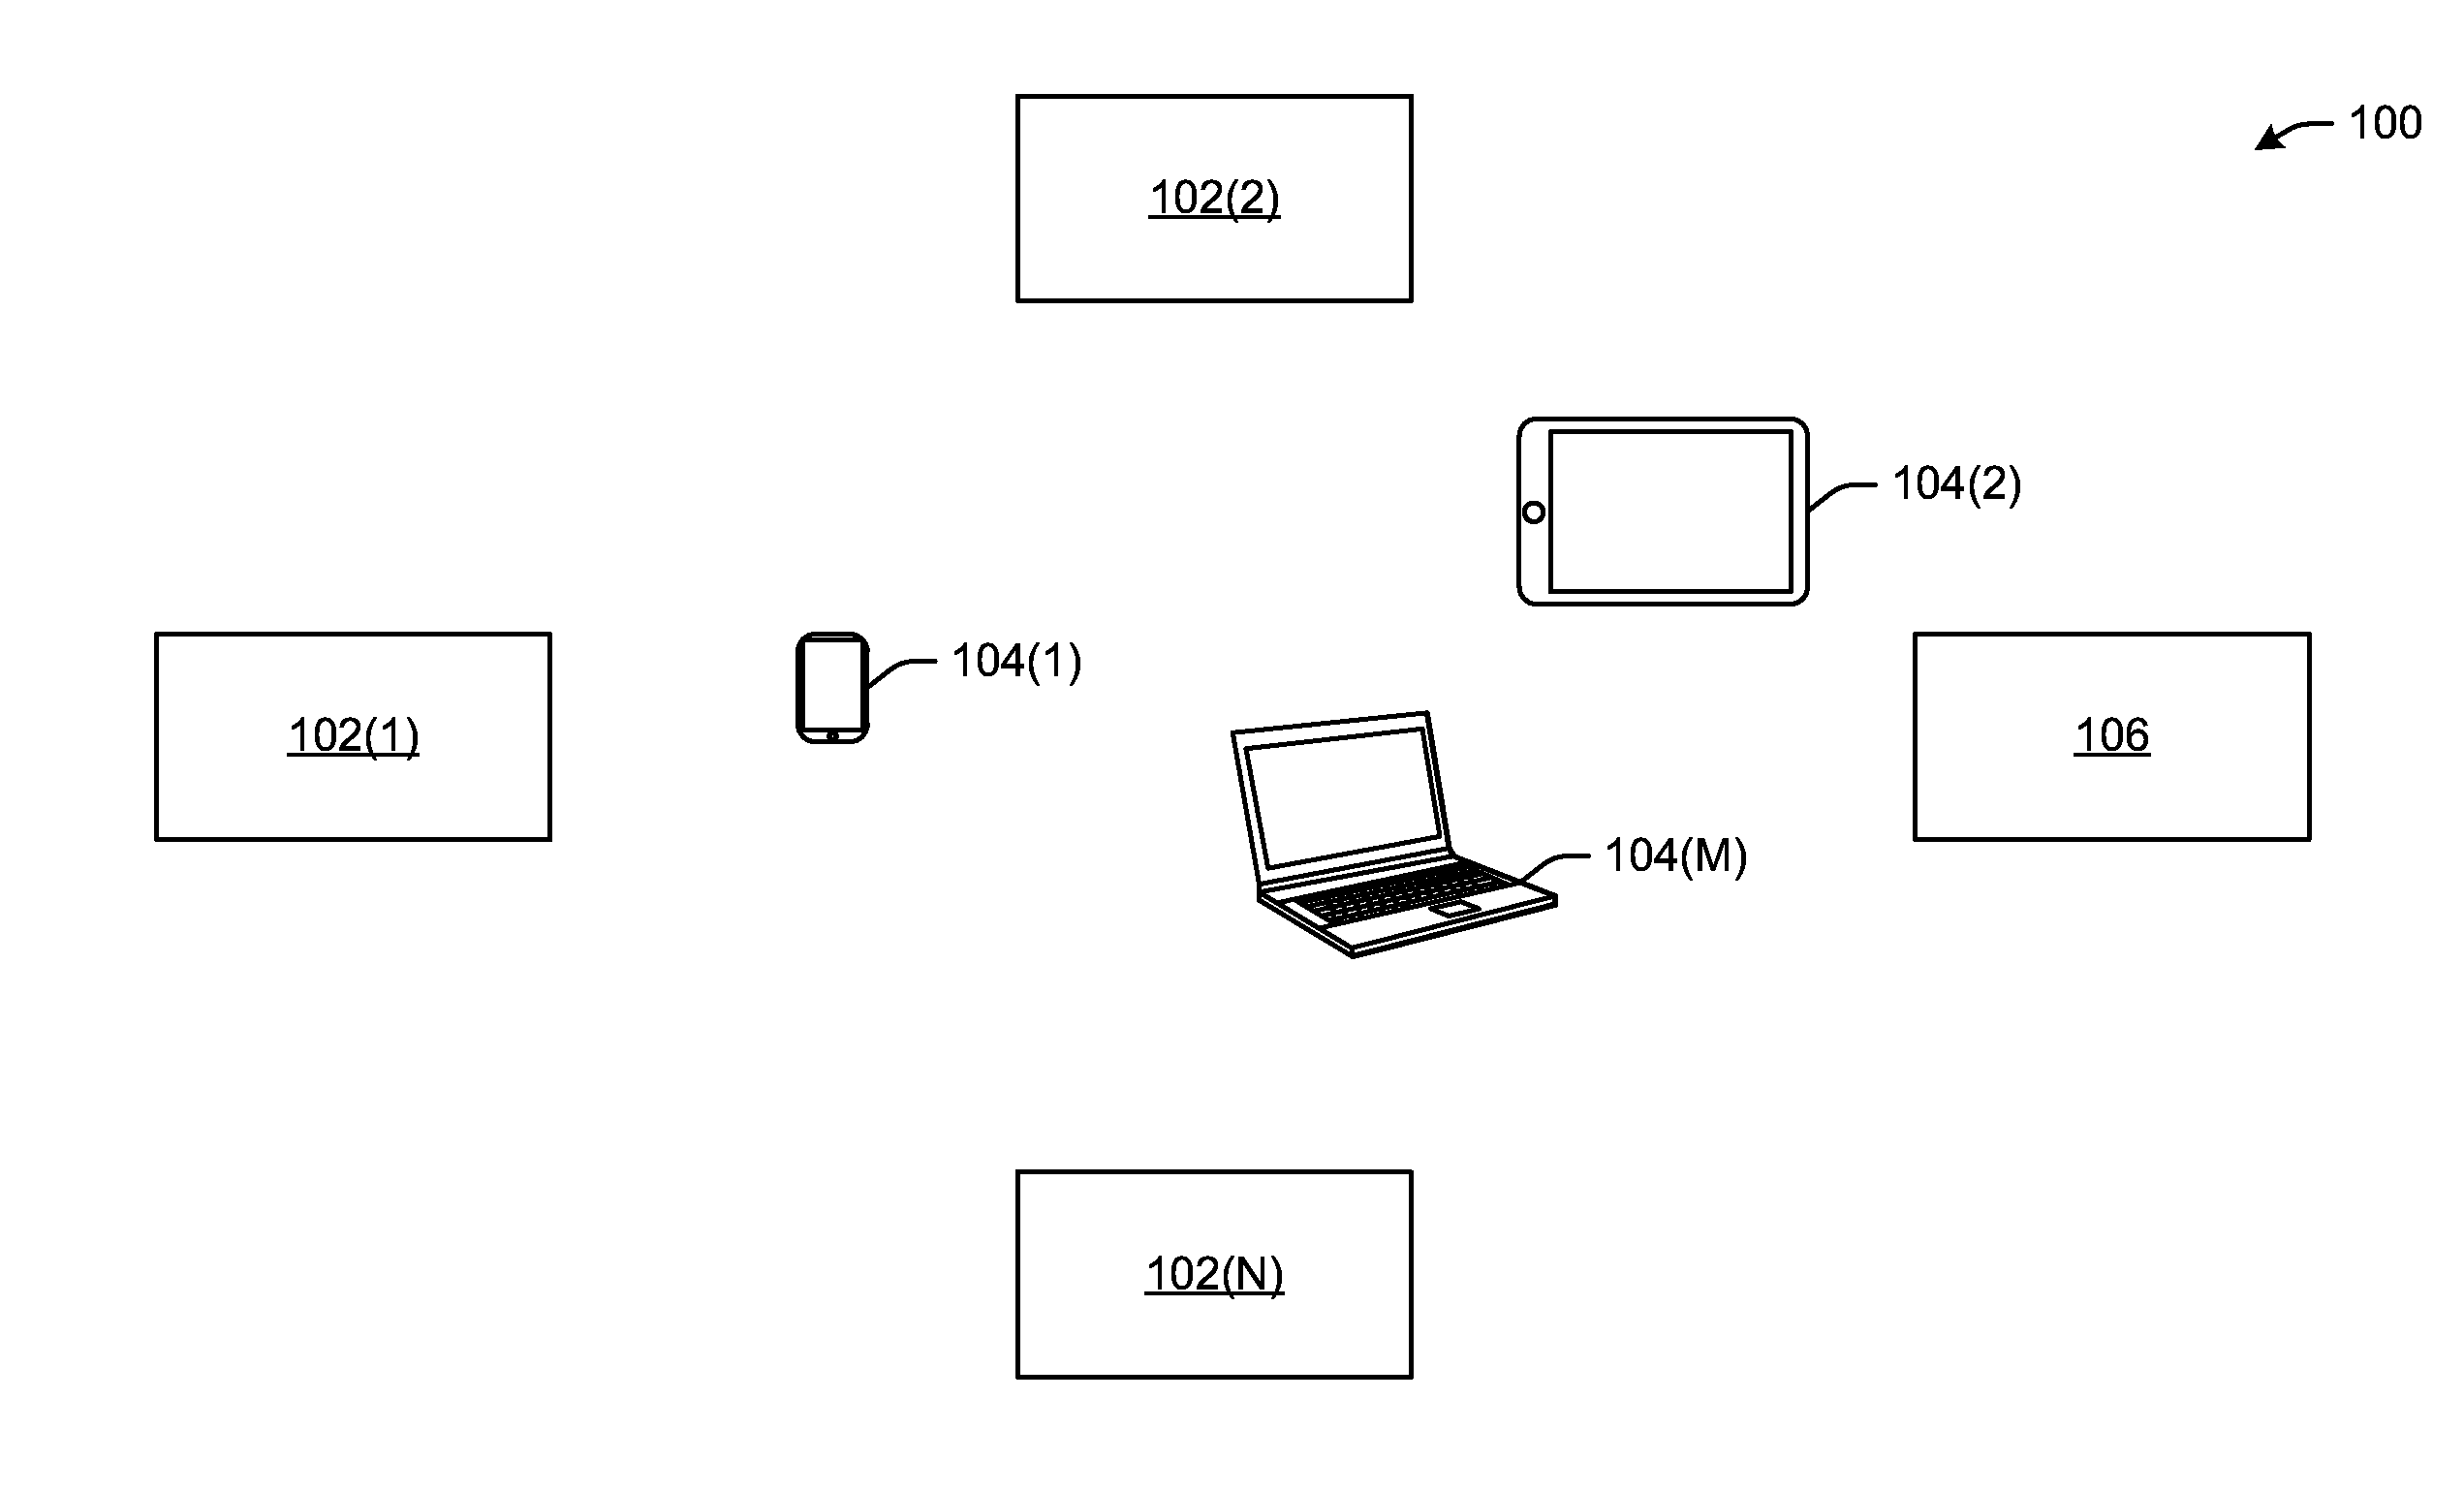 Location determination of wireless stations using one-to-many communication techniques